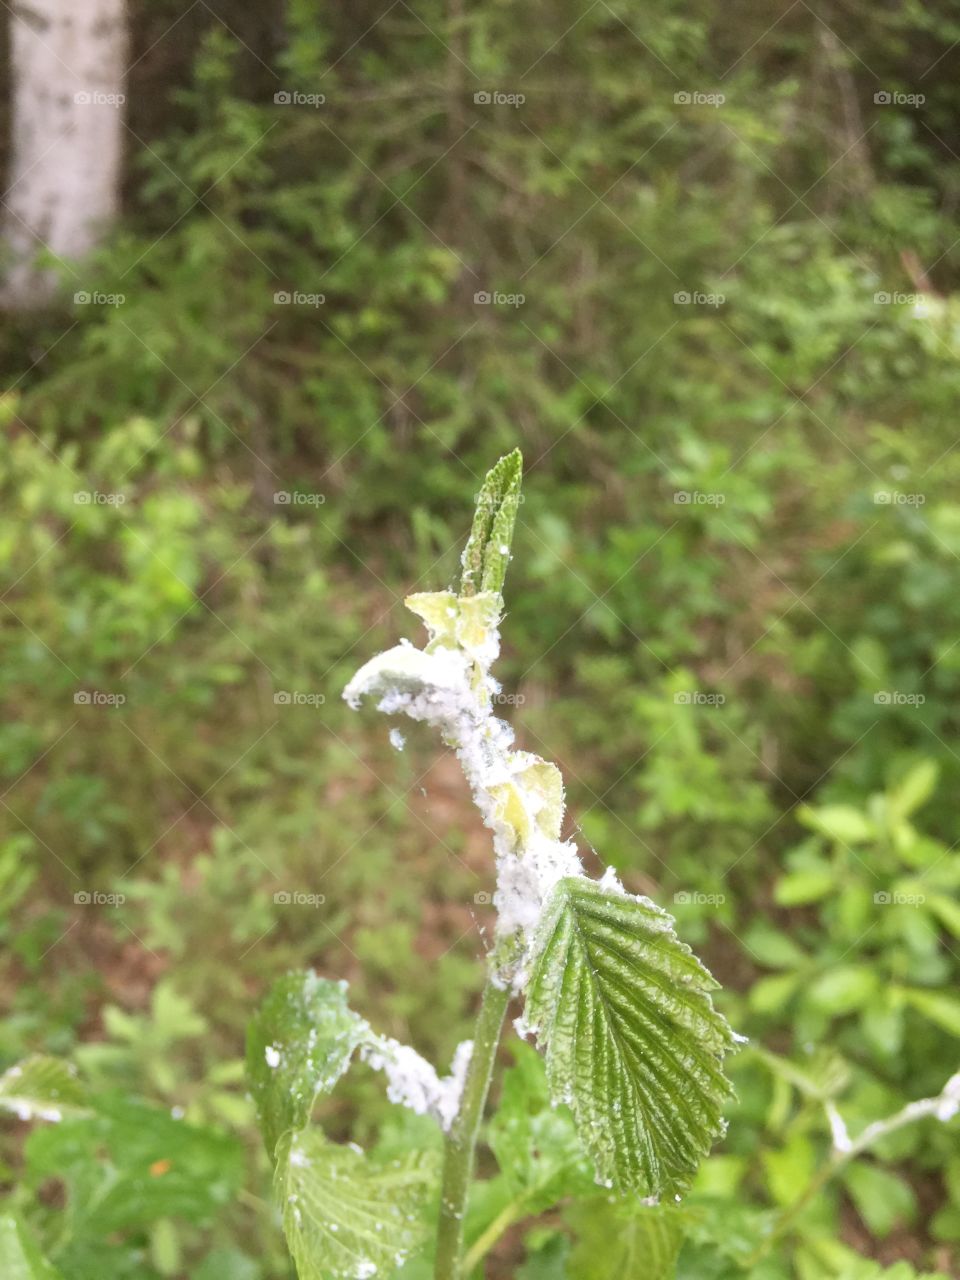 Cotton from cottonwood stuck on plant